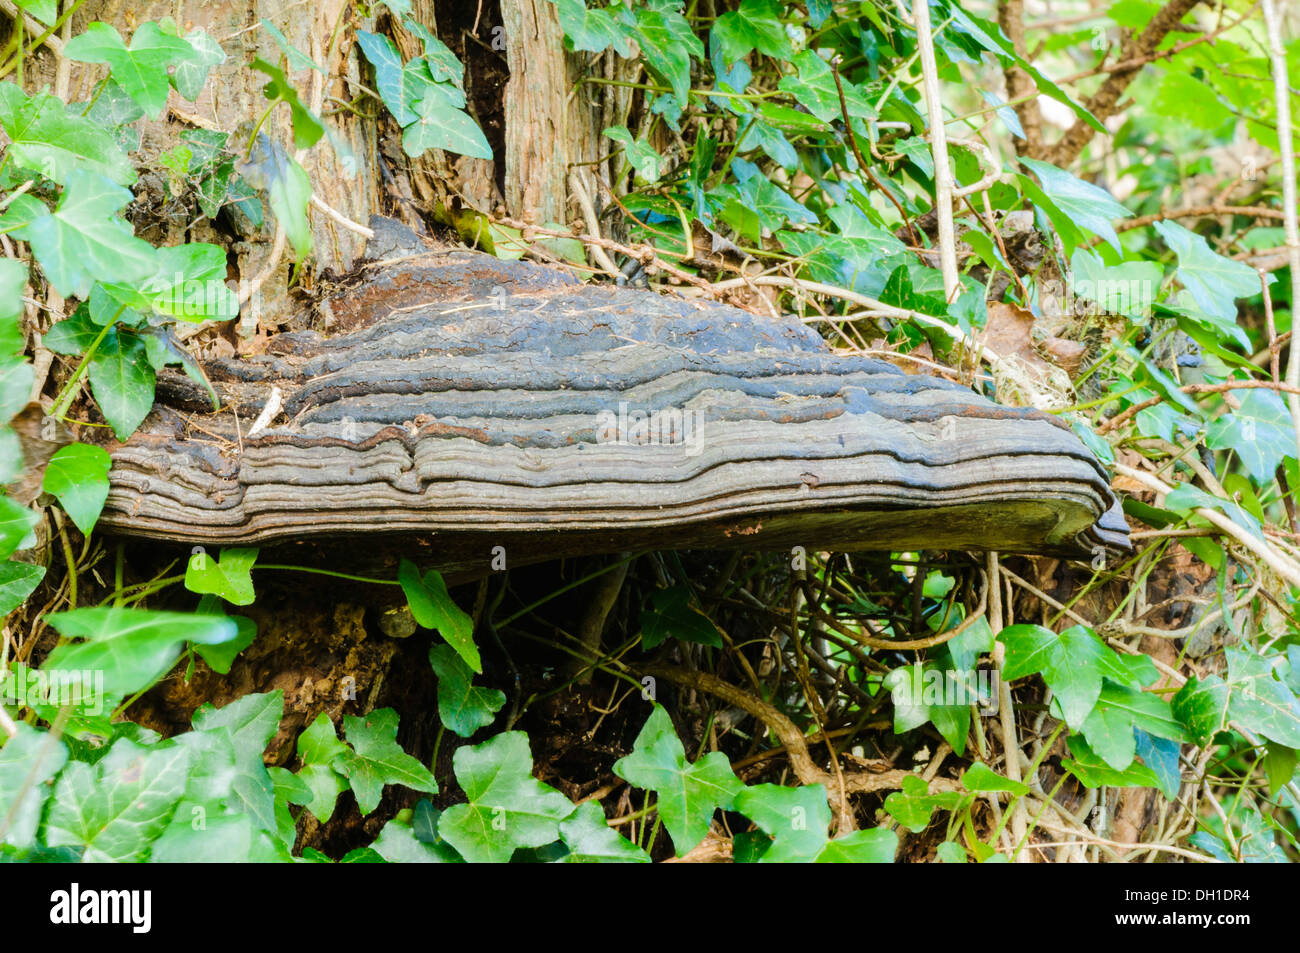 Tinder fungus (Fomes fomentaruis), a bracket fungus which grows on trees Stock Photo